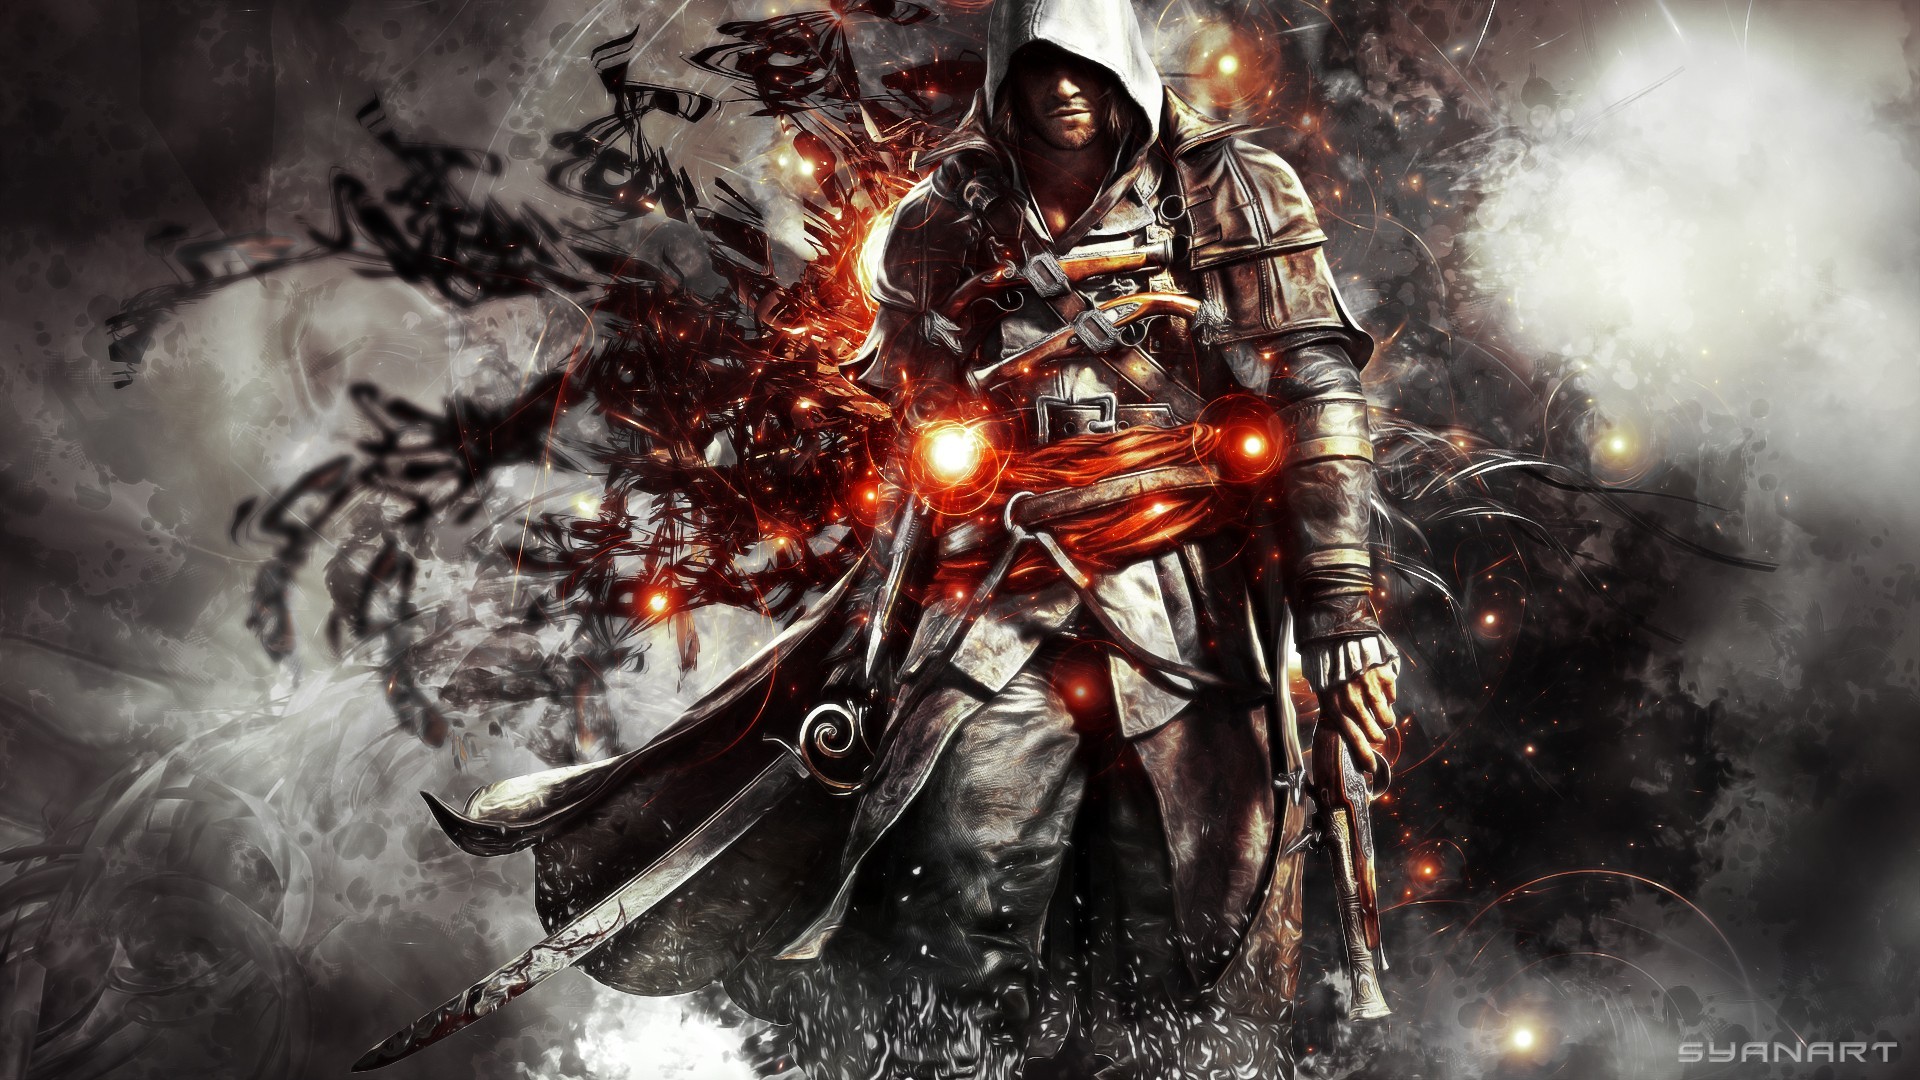 General 1920x1080 video games video game art Assassin's Creed video game men PC gaming hoods